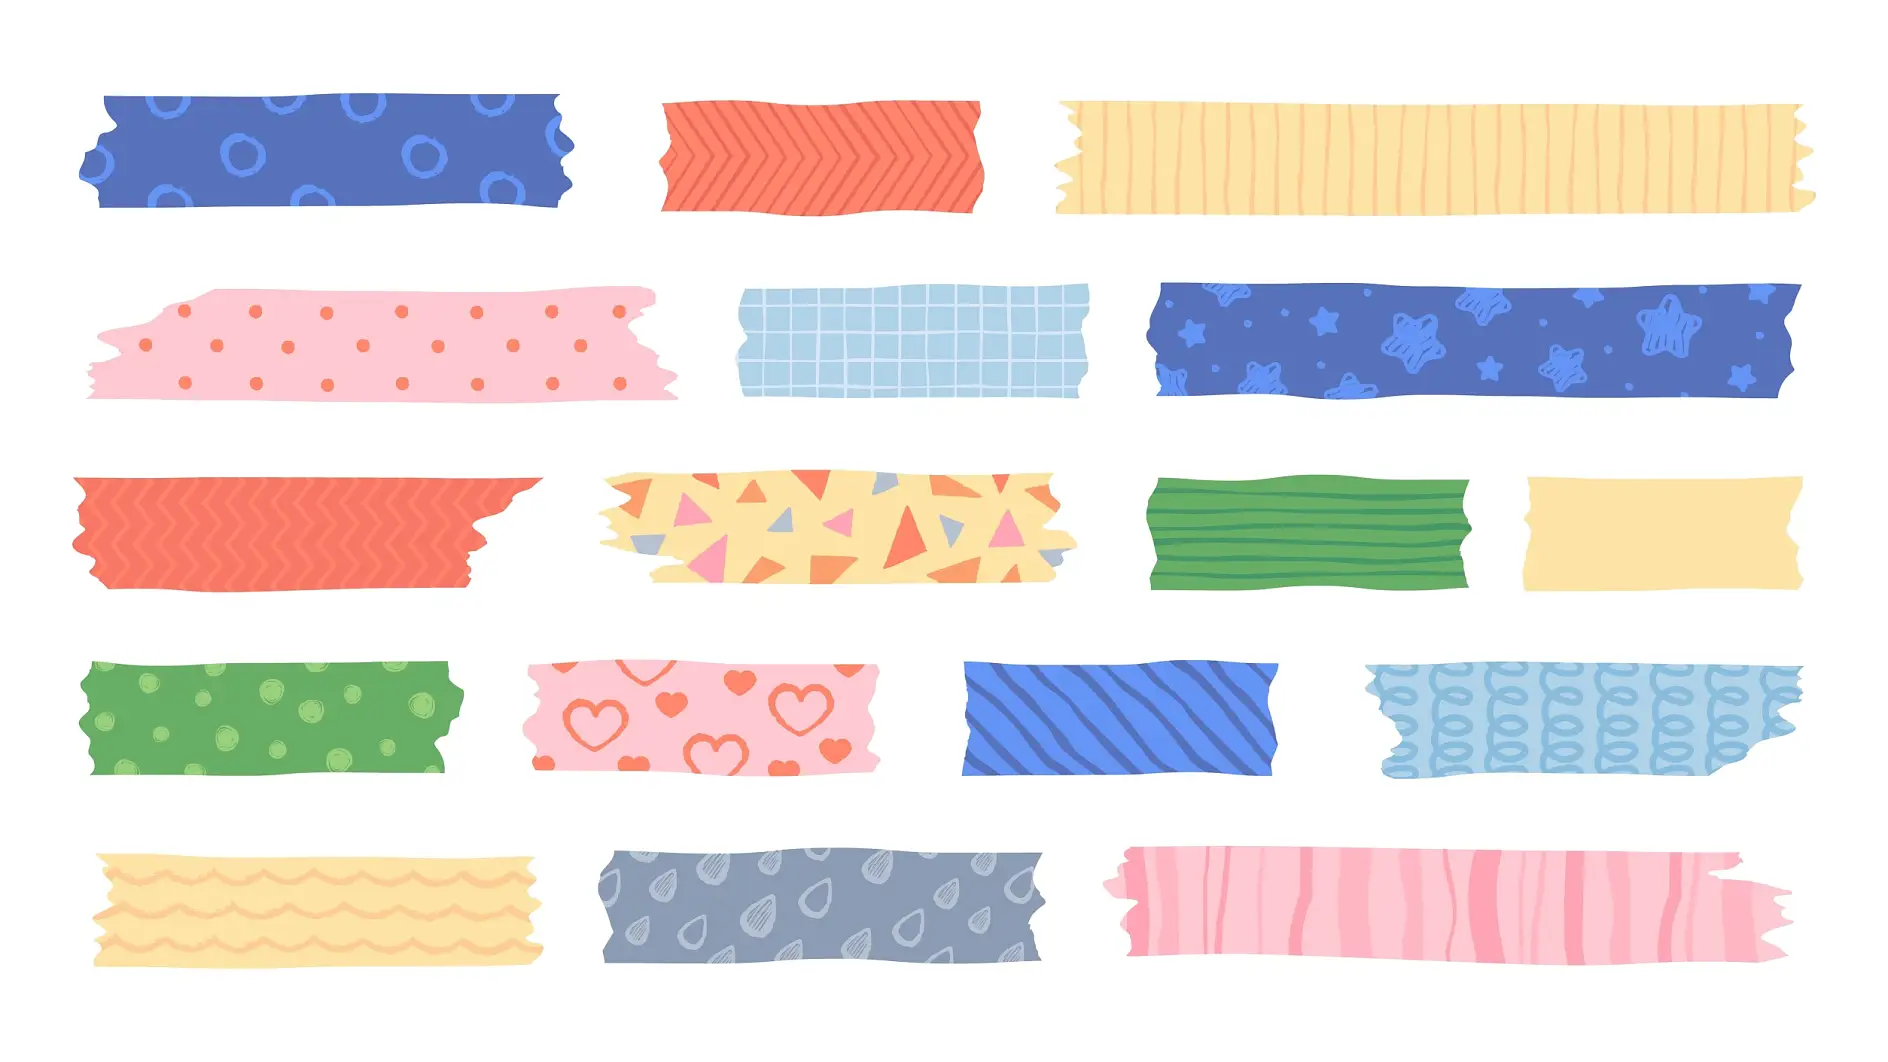 Washi tape with cute patterns, adhesive scotch stripes for scrapbooking. Japanese masking tapes with dots, stars and hearts, colorful mask strips for scrapbook decor vector set